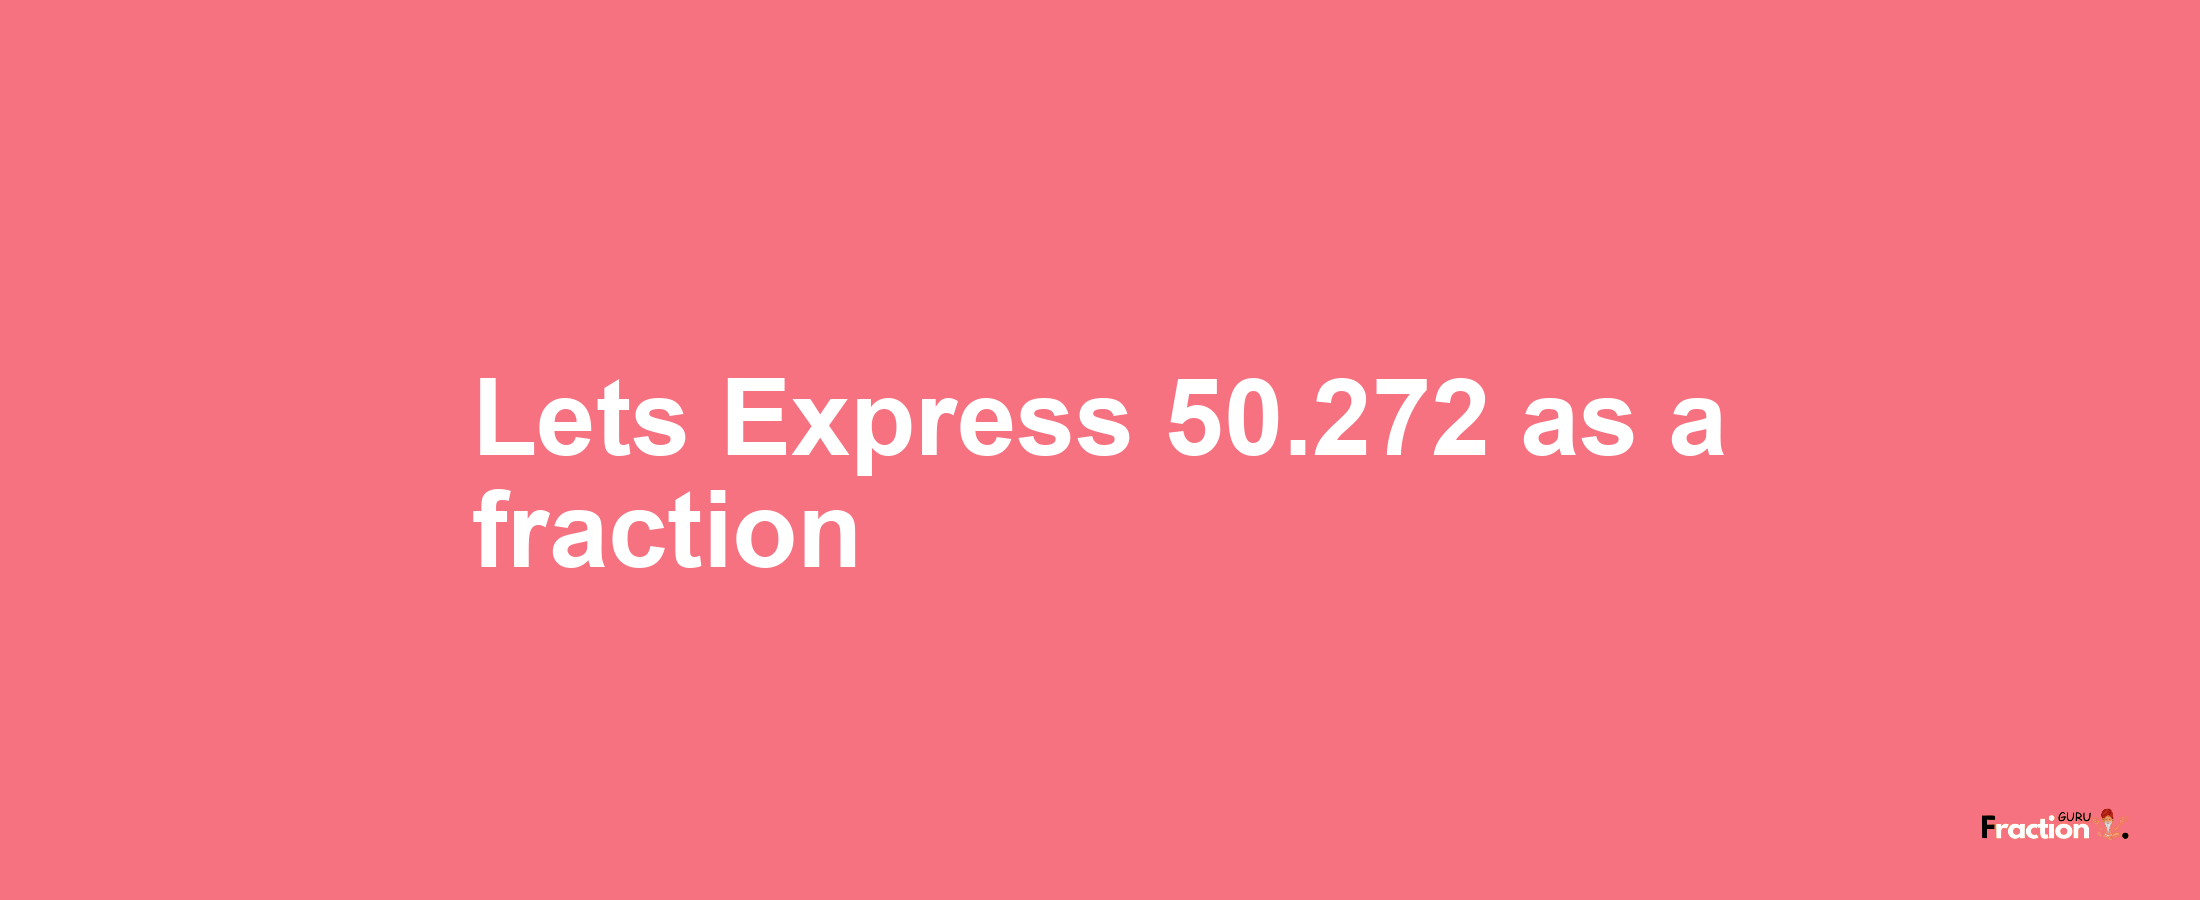 Lets Express 50.272 as afraction